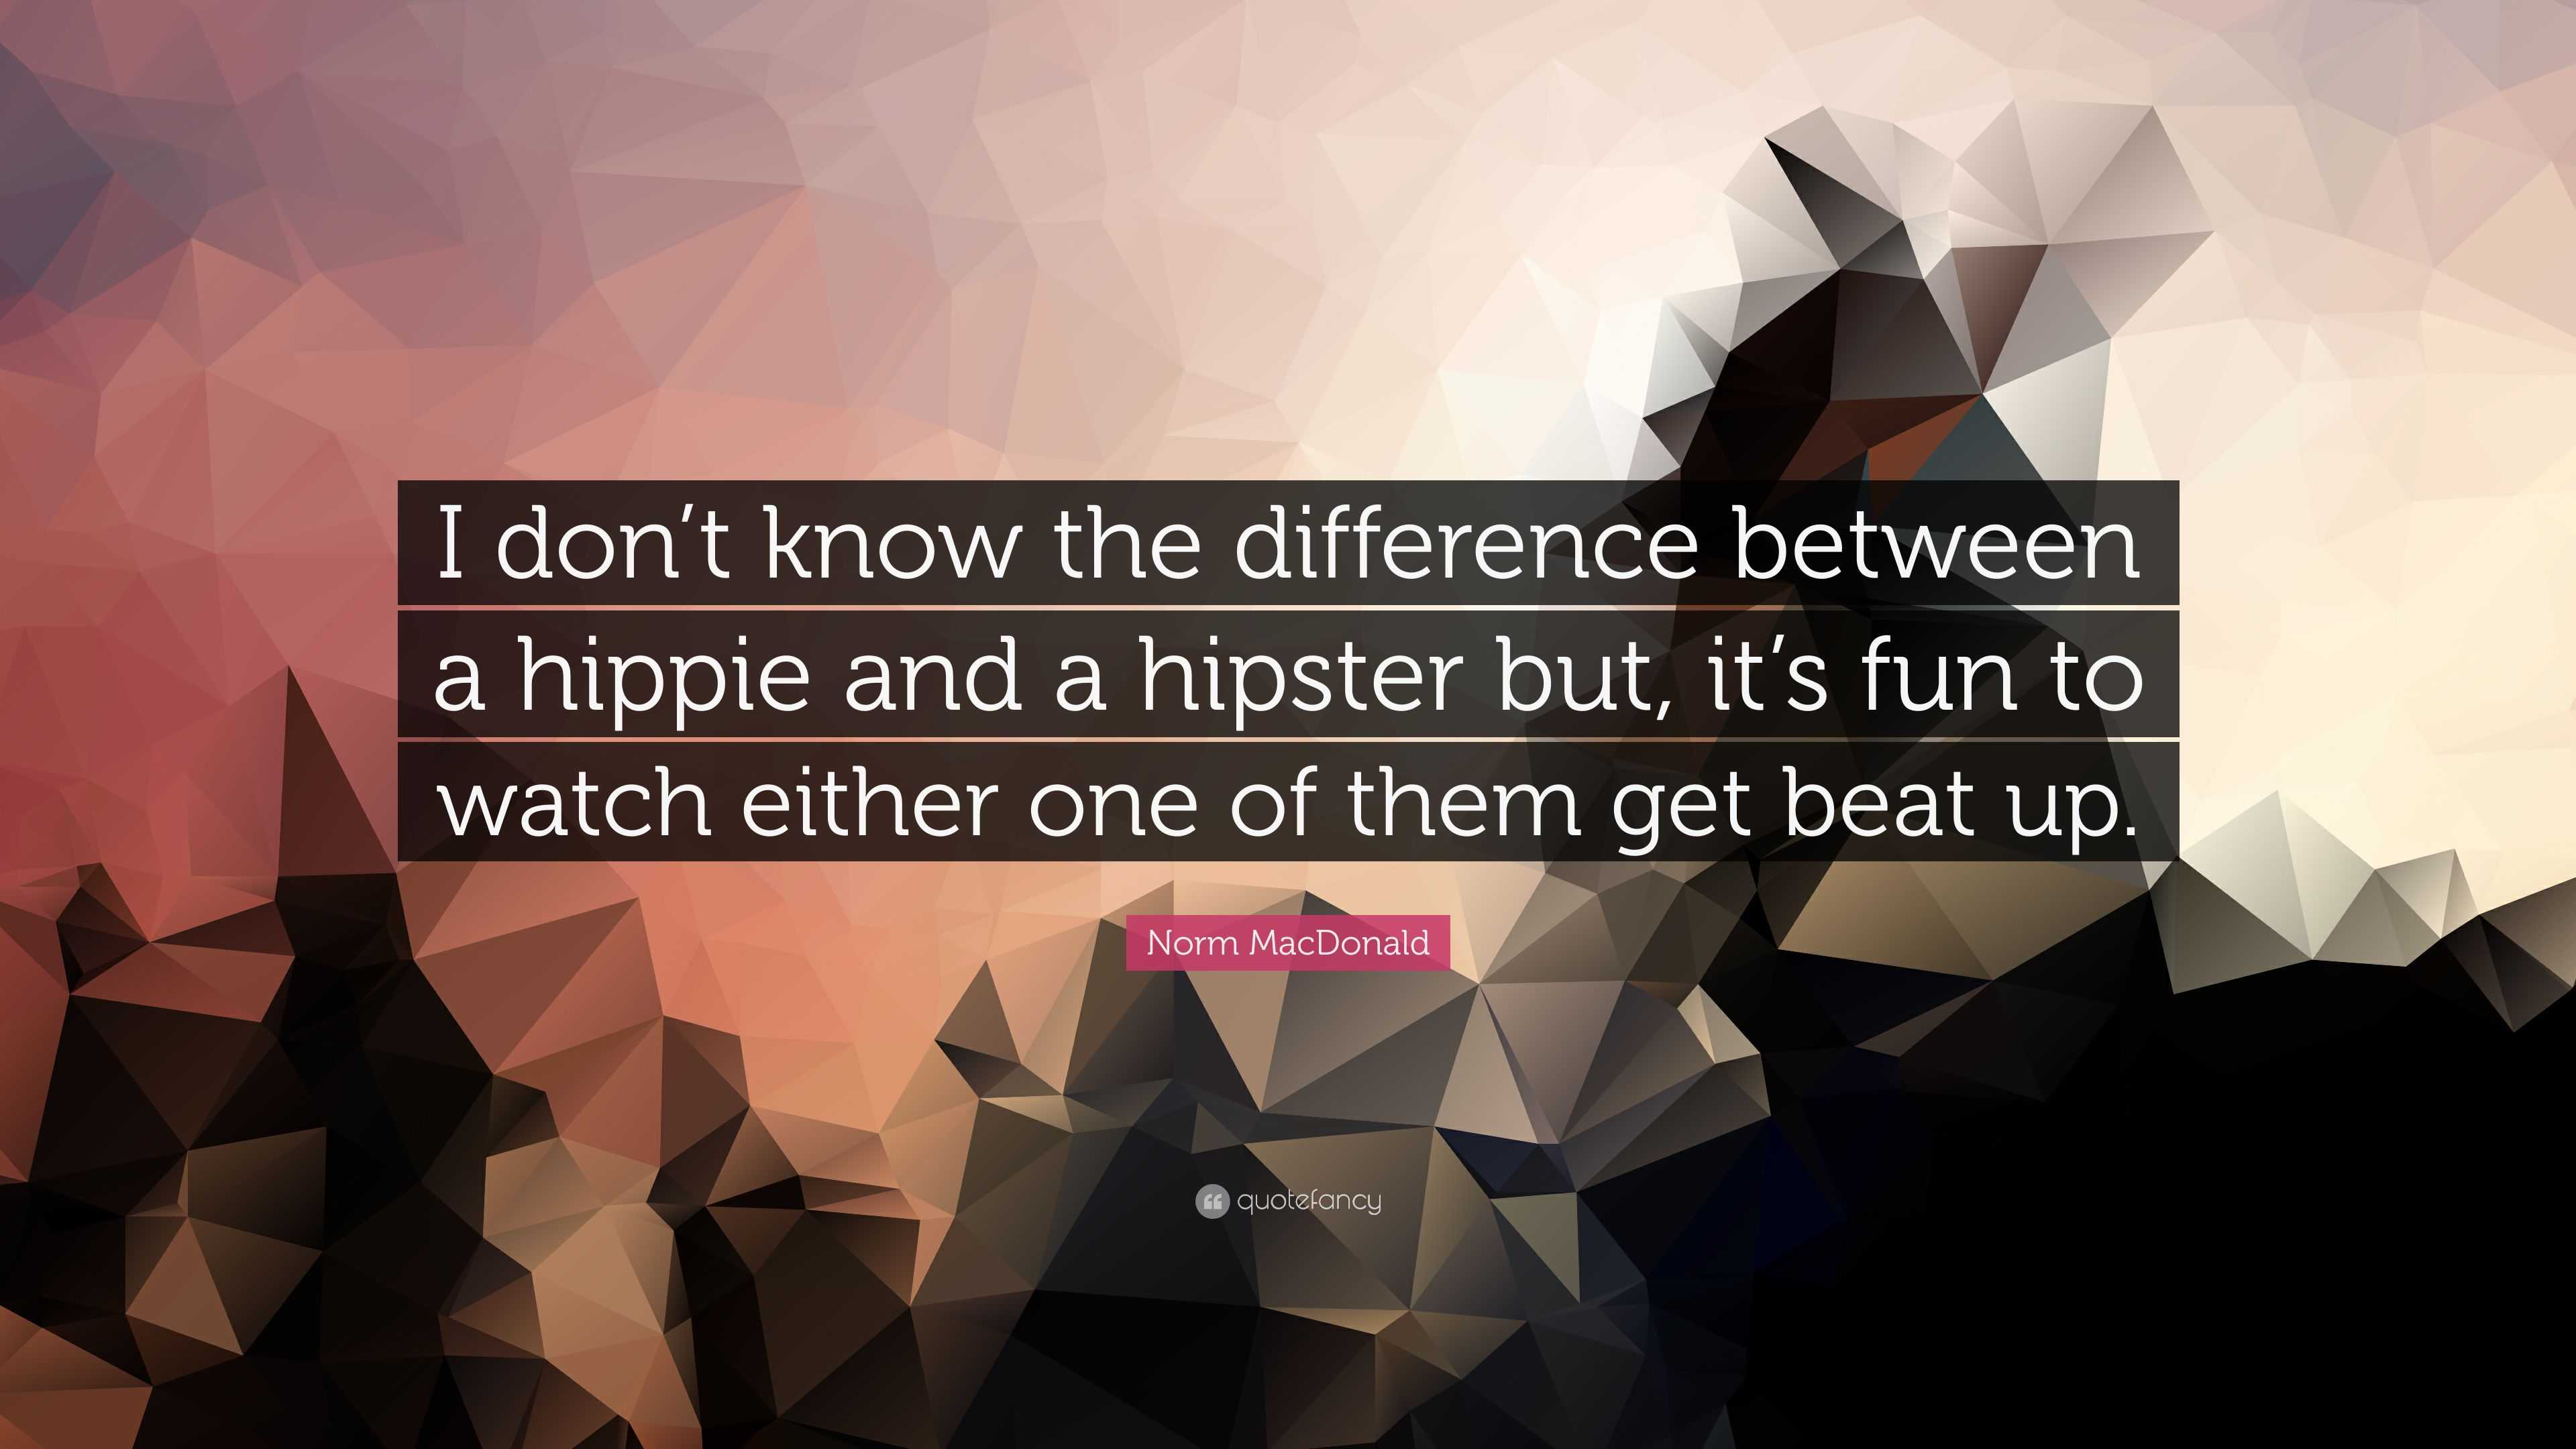 https://quotefancy.com/media/wallpaper/3840x2160/2240302-Norm-MacDonald-Quote-I-don-t-know-the-difference-between-a-hippie.jpg